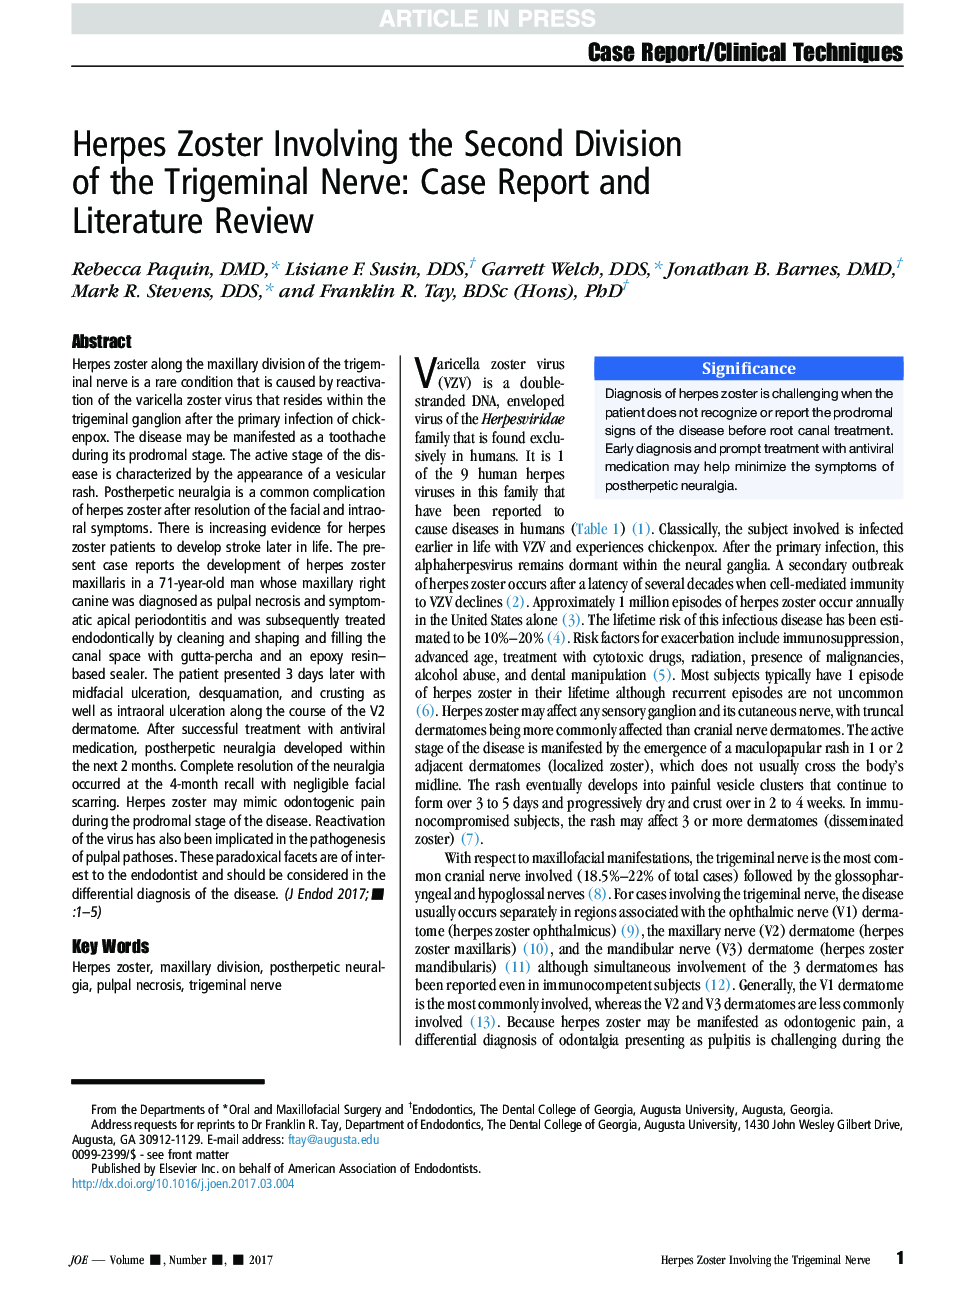 Herpes Zoster Involving the Second Division ofÂ the Trigeminal Nerve: Case Report and LiteratureÂ Review